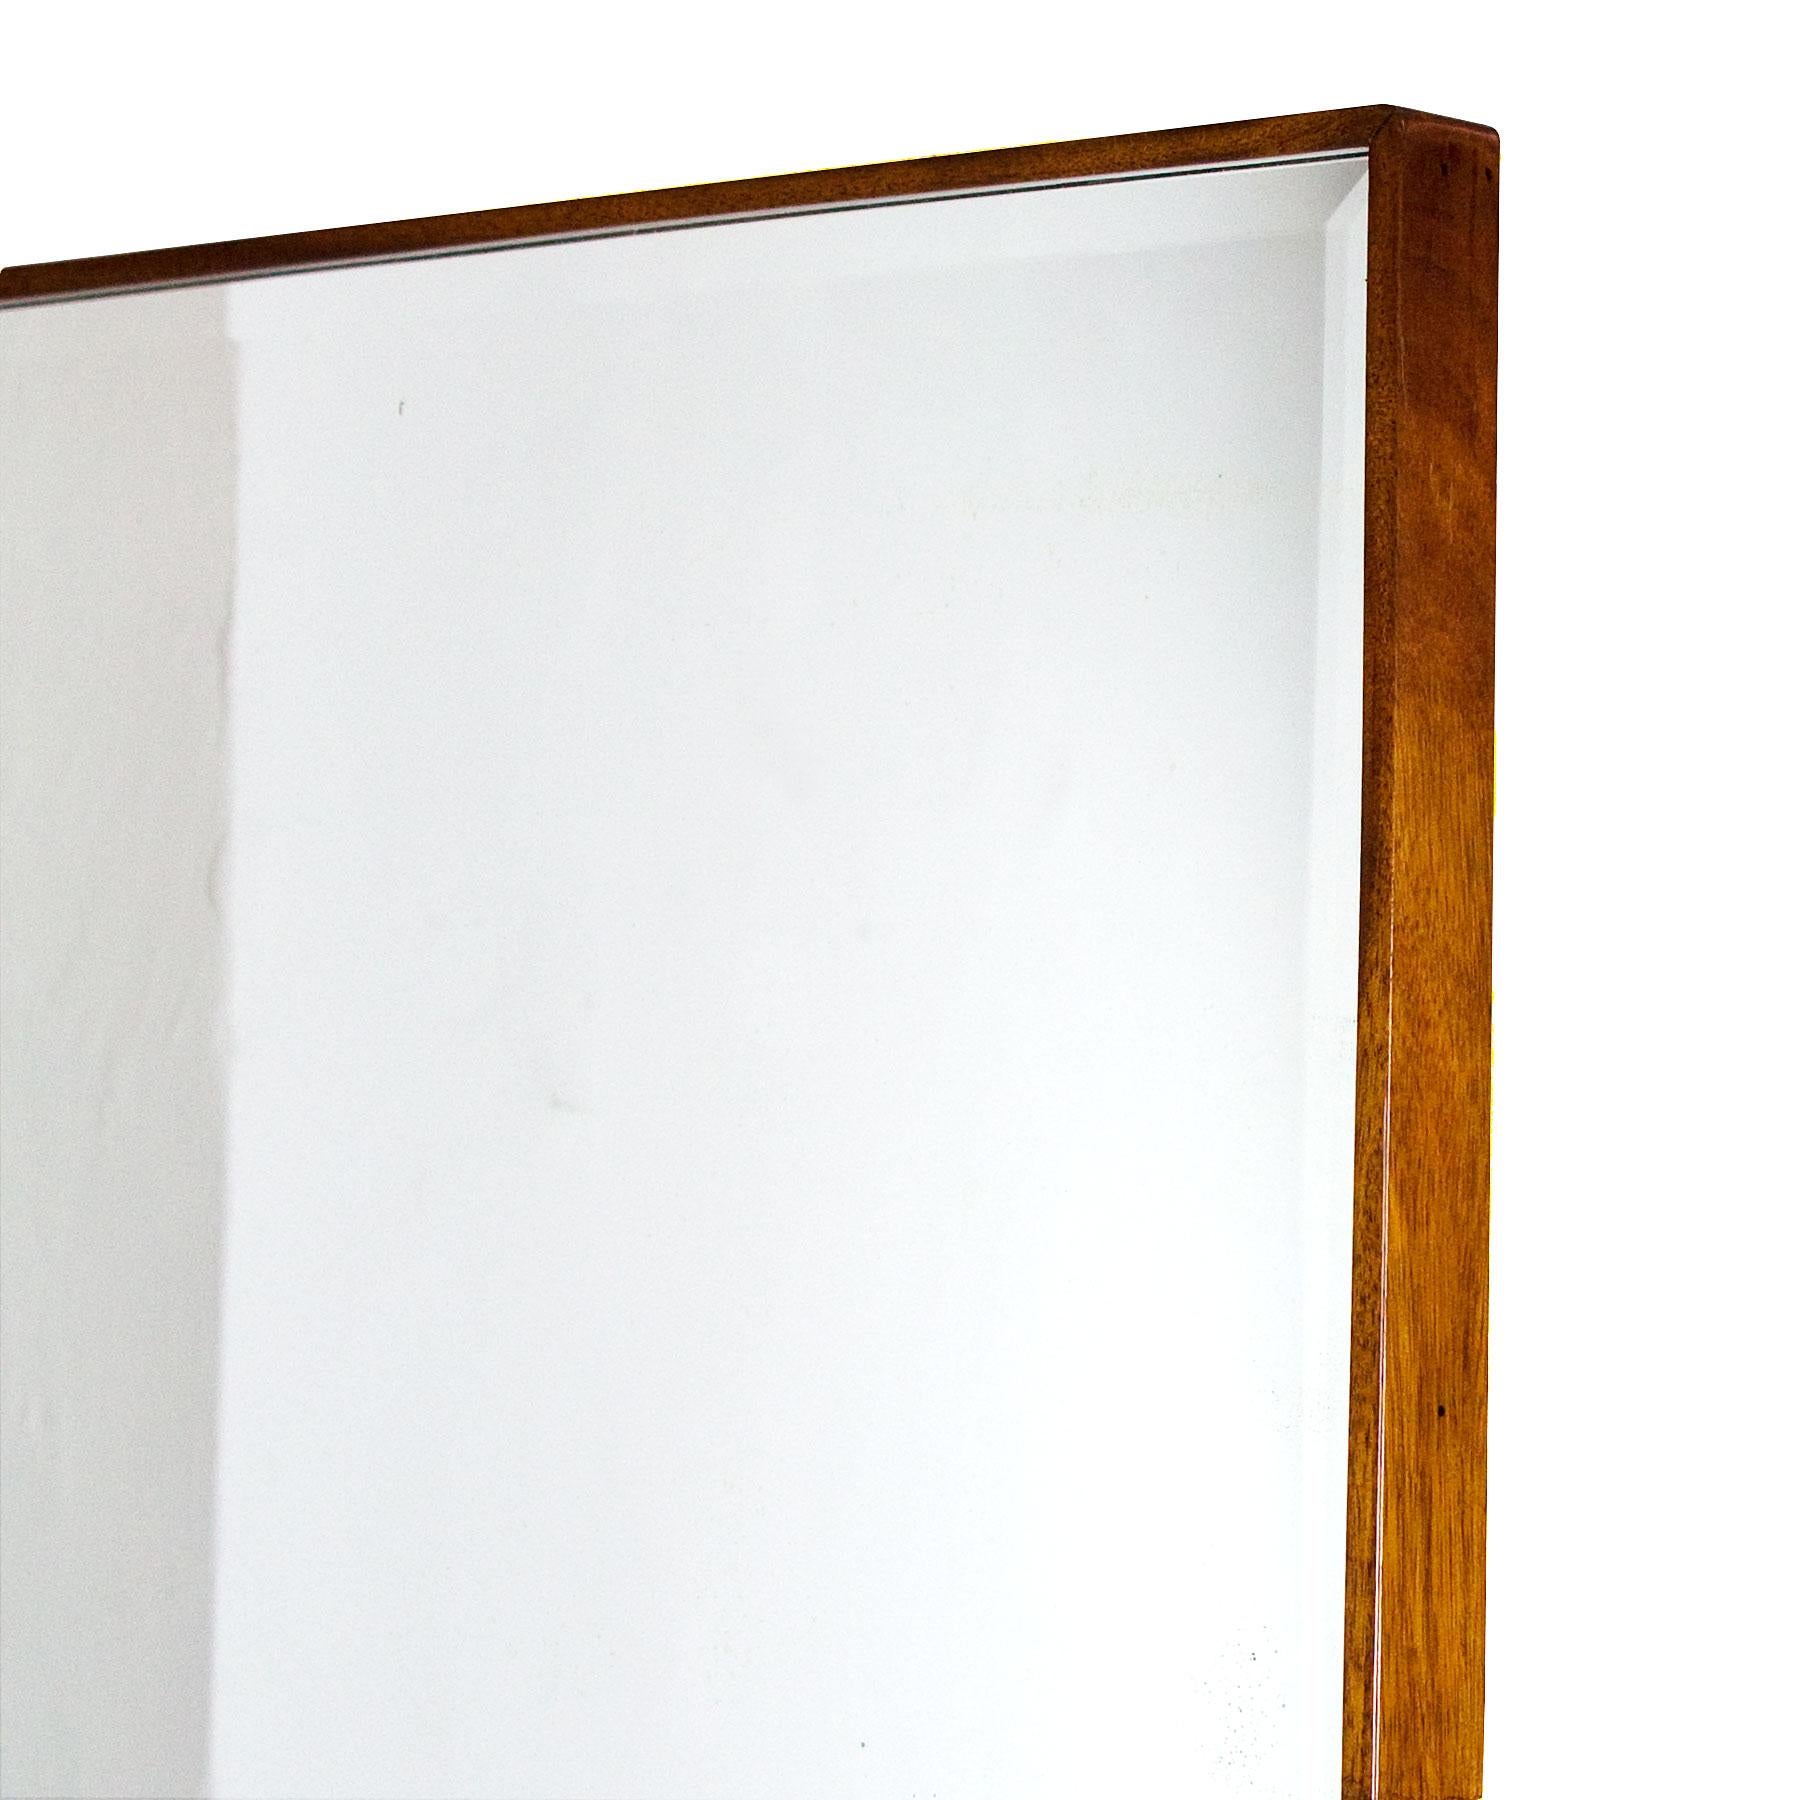 Mirror 1930s Art Deco Vanity, Style of Jean Fauré Mottled Mahogany, Toulouse, France